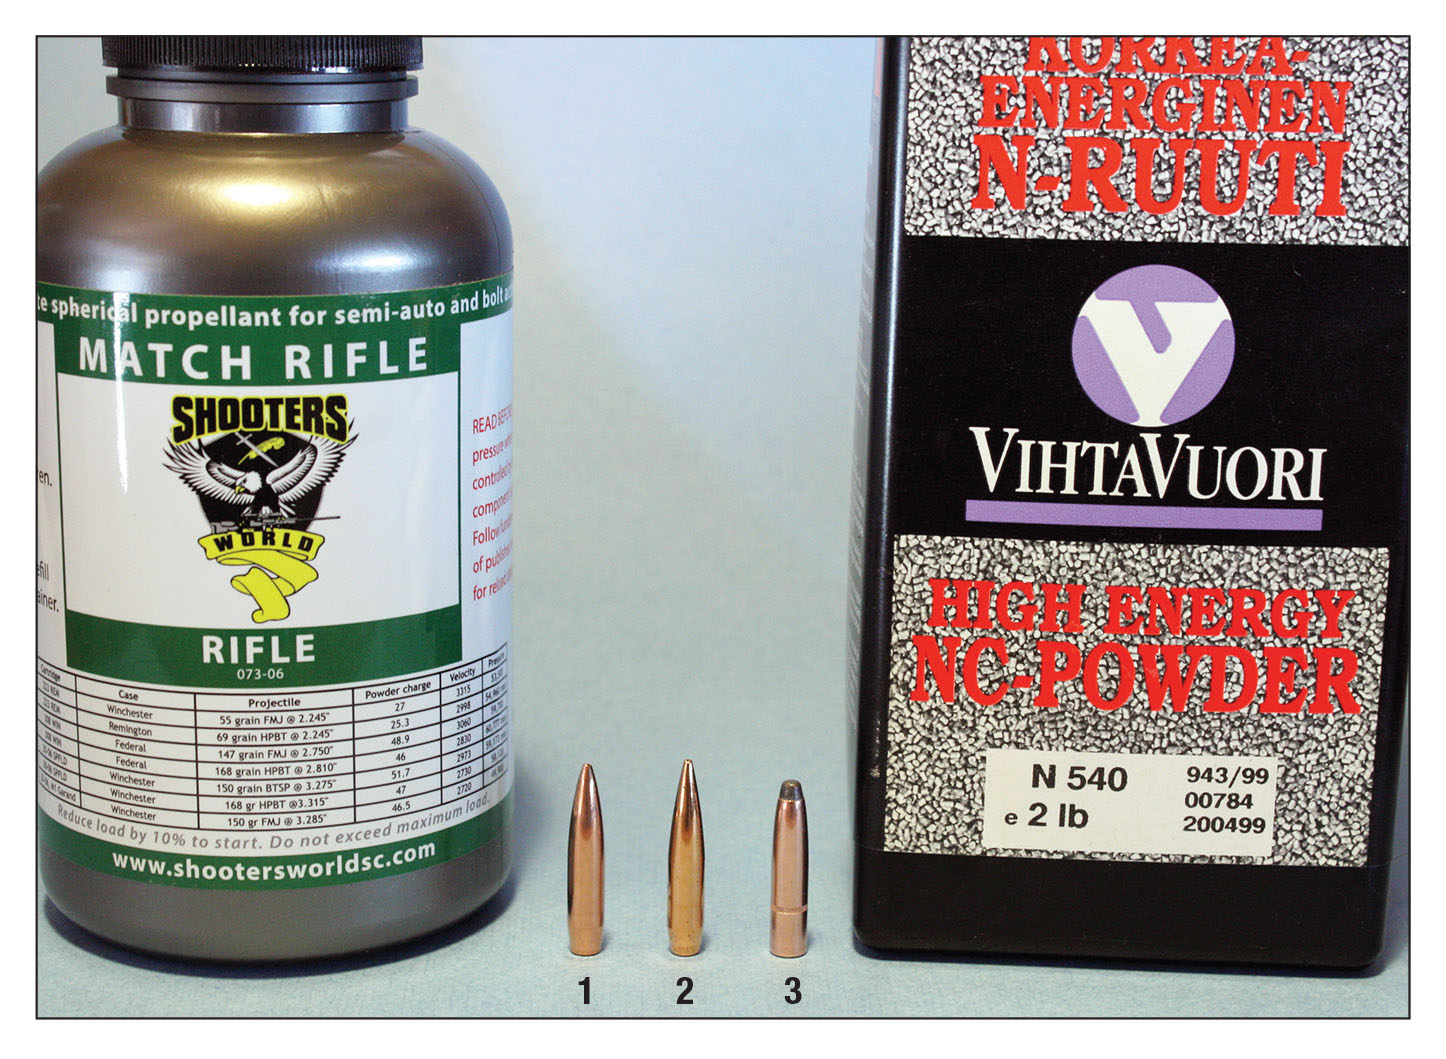 Heavier bullets worked best with Shooters World Match Rifle and Vihtavuori N540. (1) Lapua 139-grain Scenar, (2) Berger 140-grain Hunting VLD, (3) Prvi Partizan 156-grain soft-point roundnose.